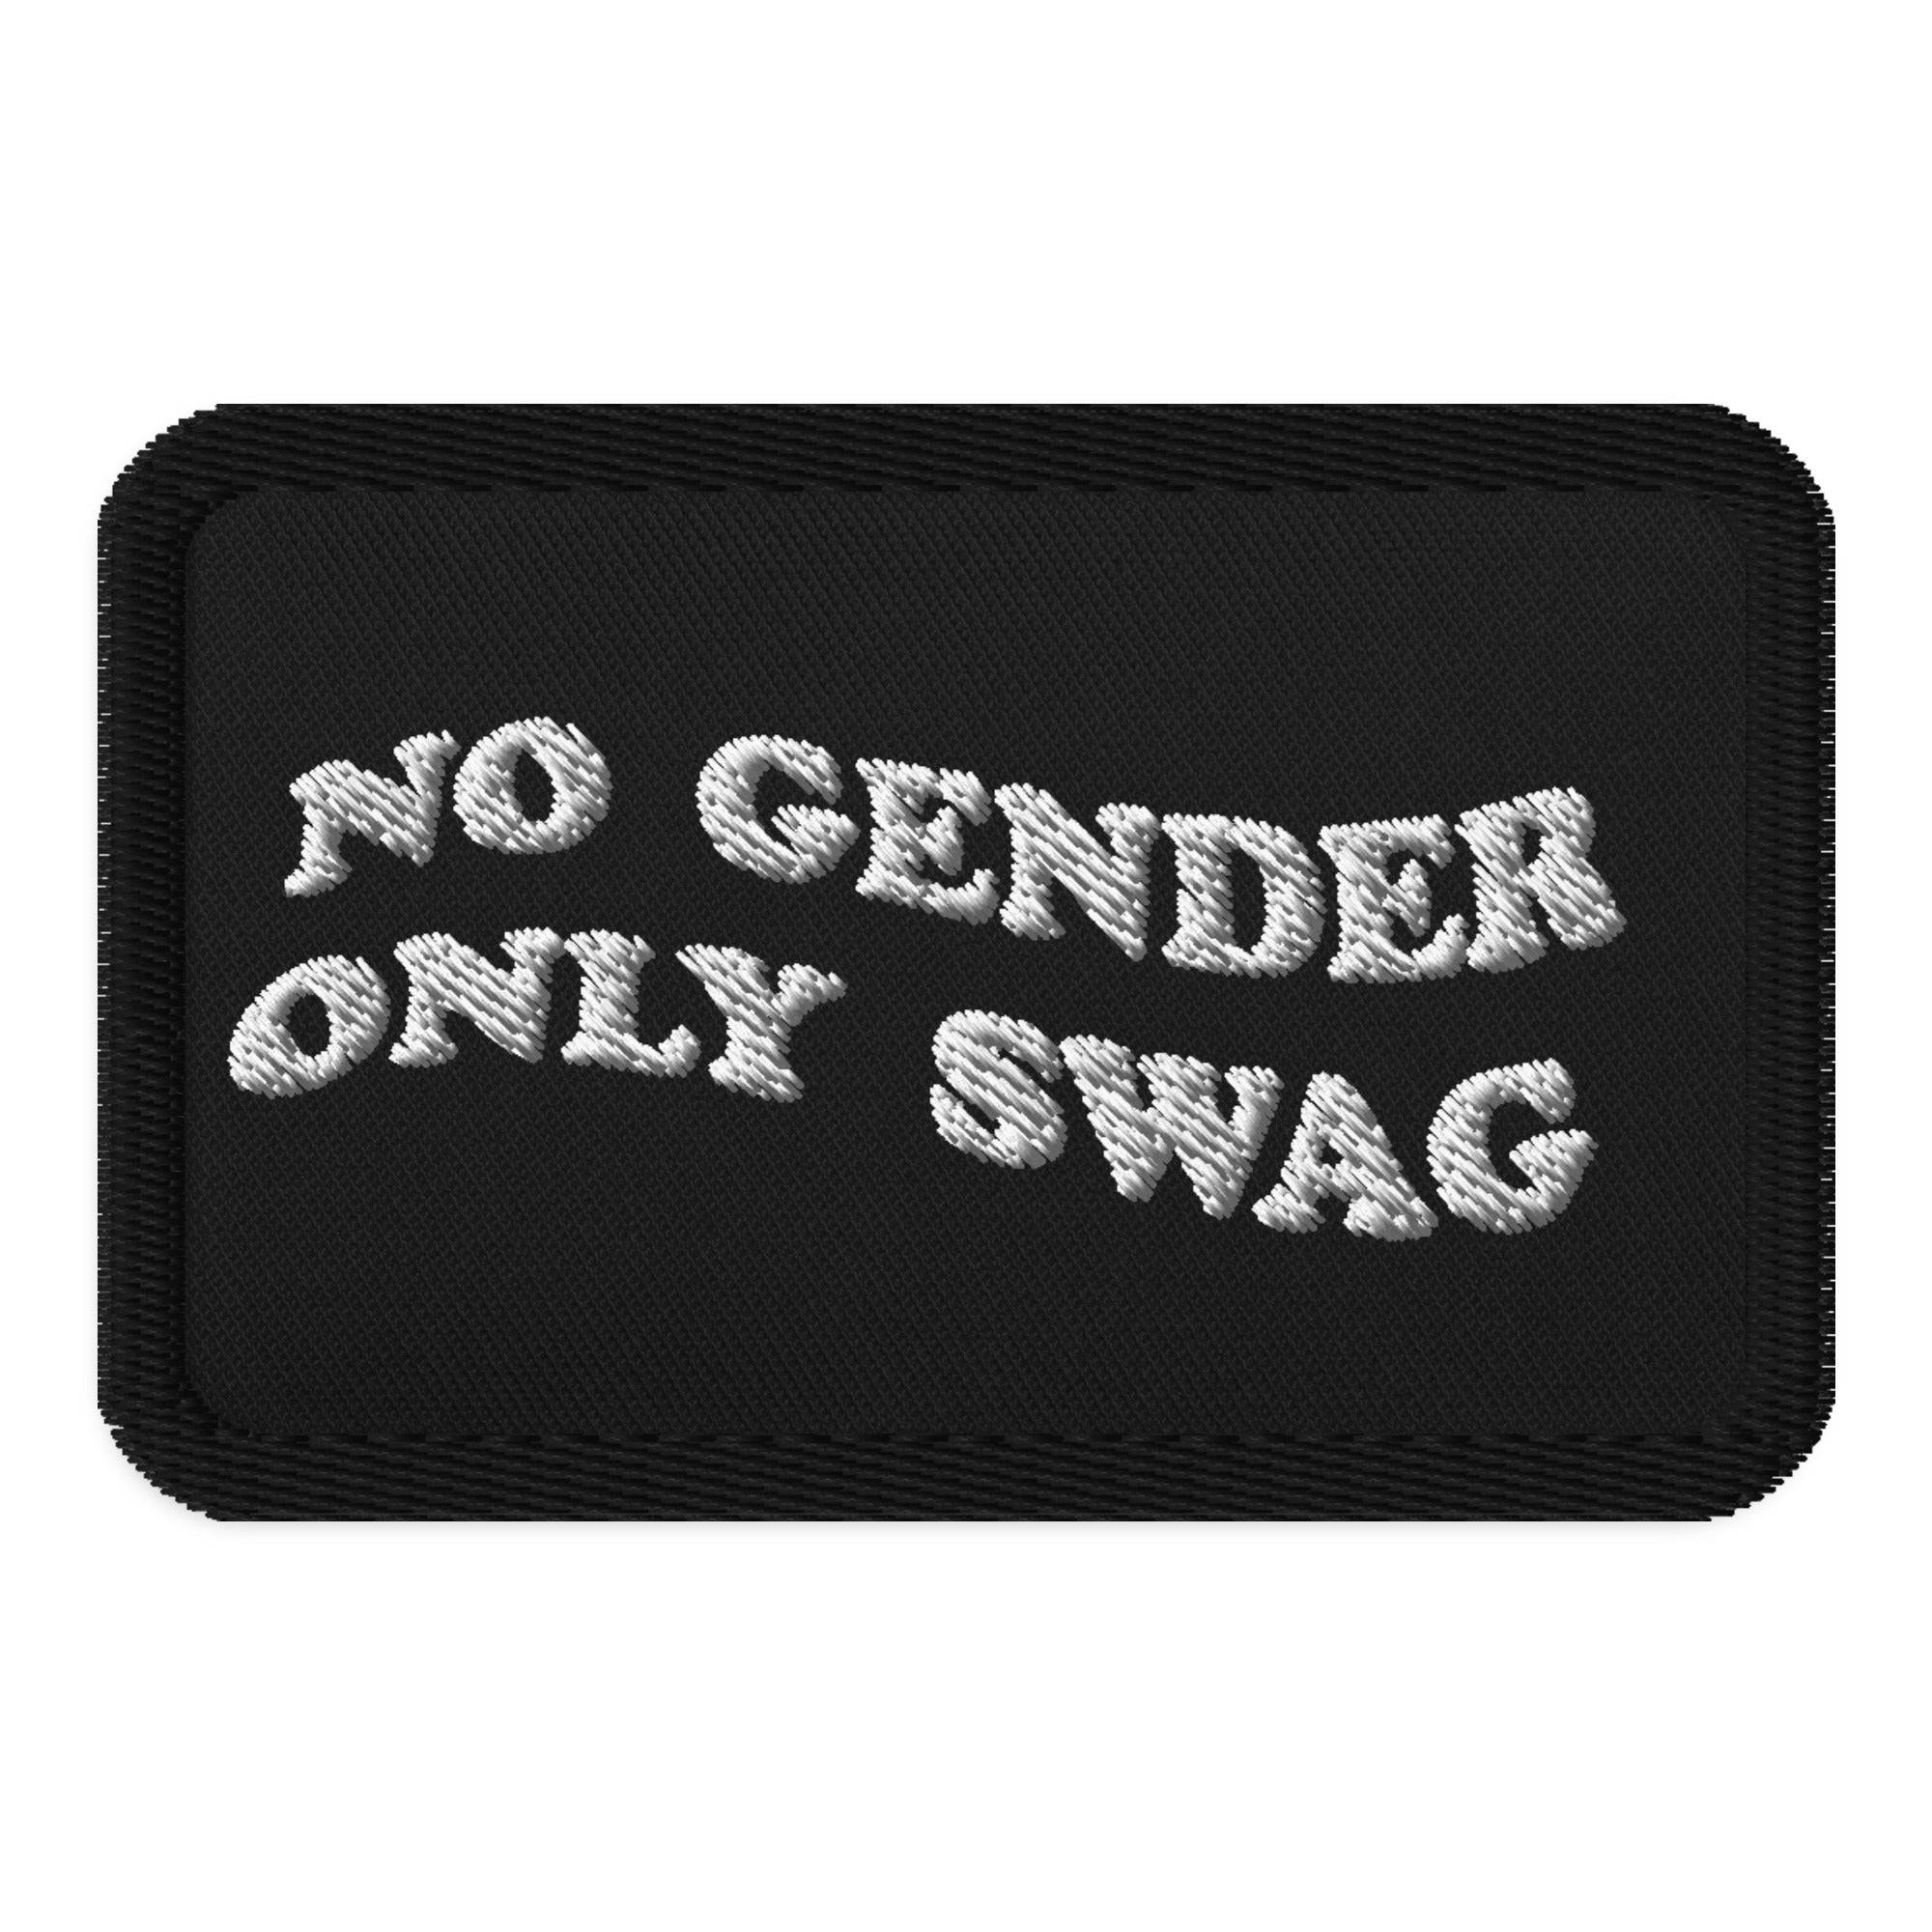 No Gender Only Swag Patch Embroidered patches